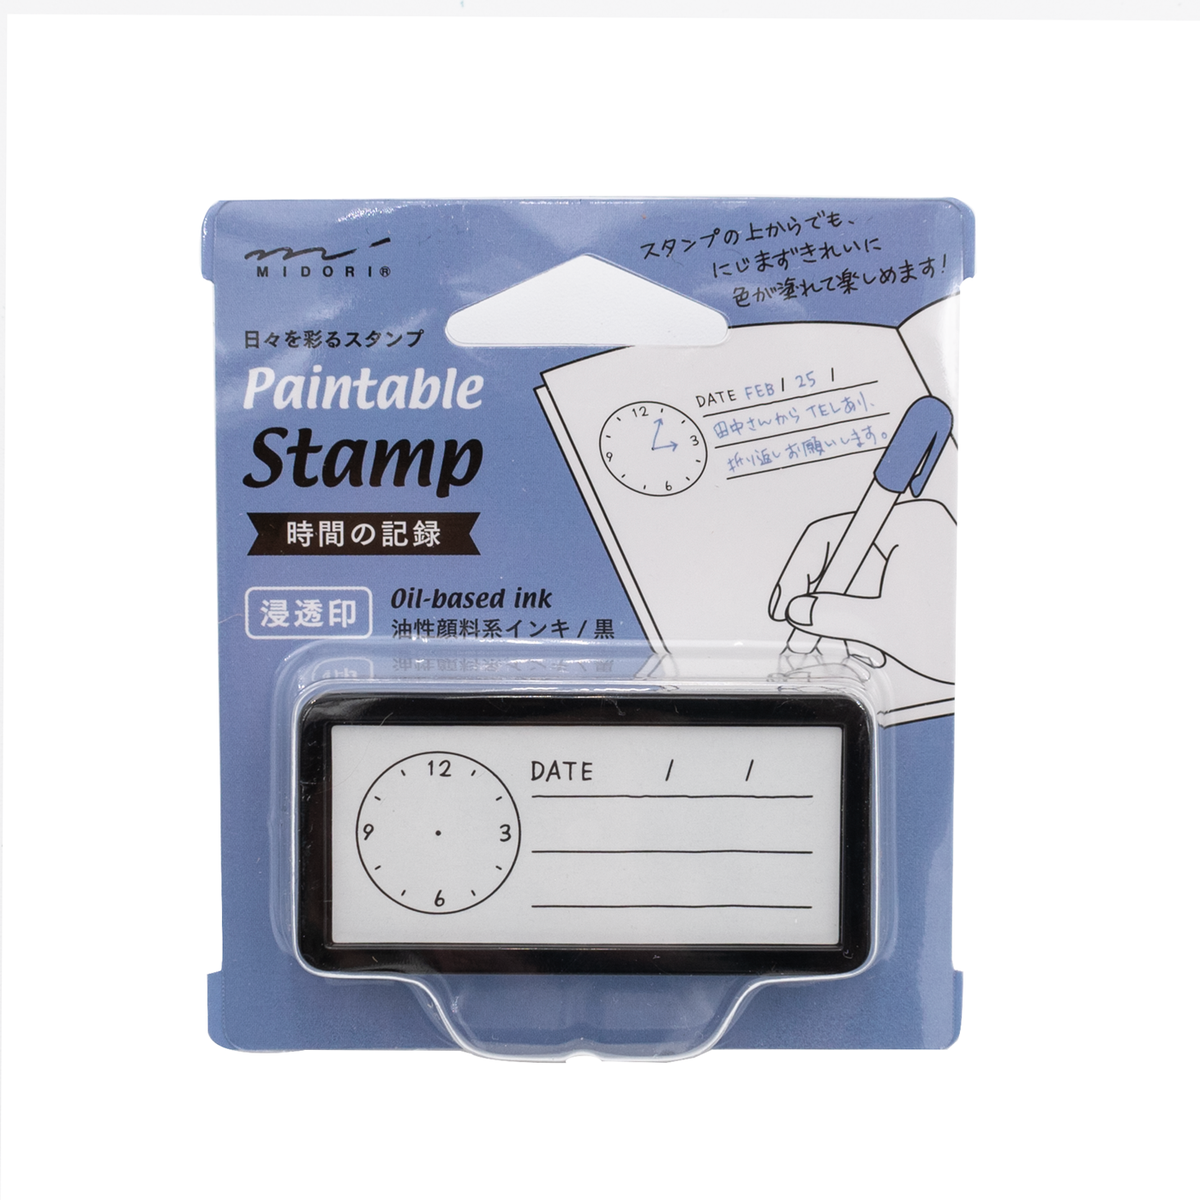 Find the best Midori Paintable Stamp Pre-inked Clock on the internet